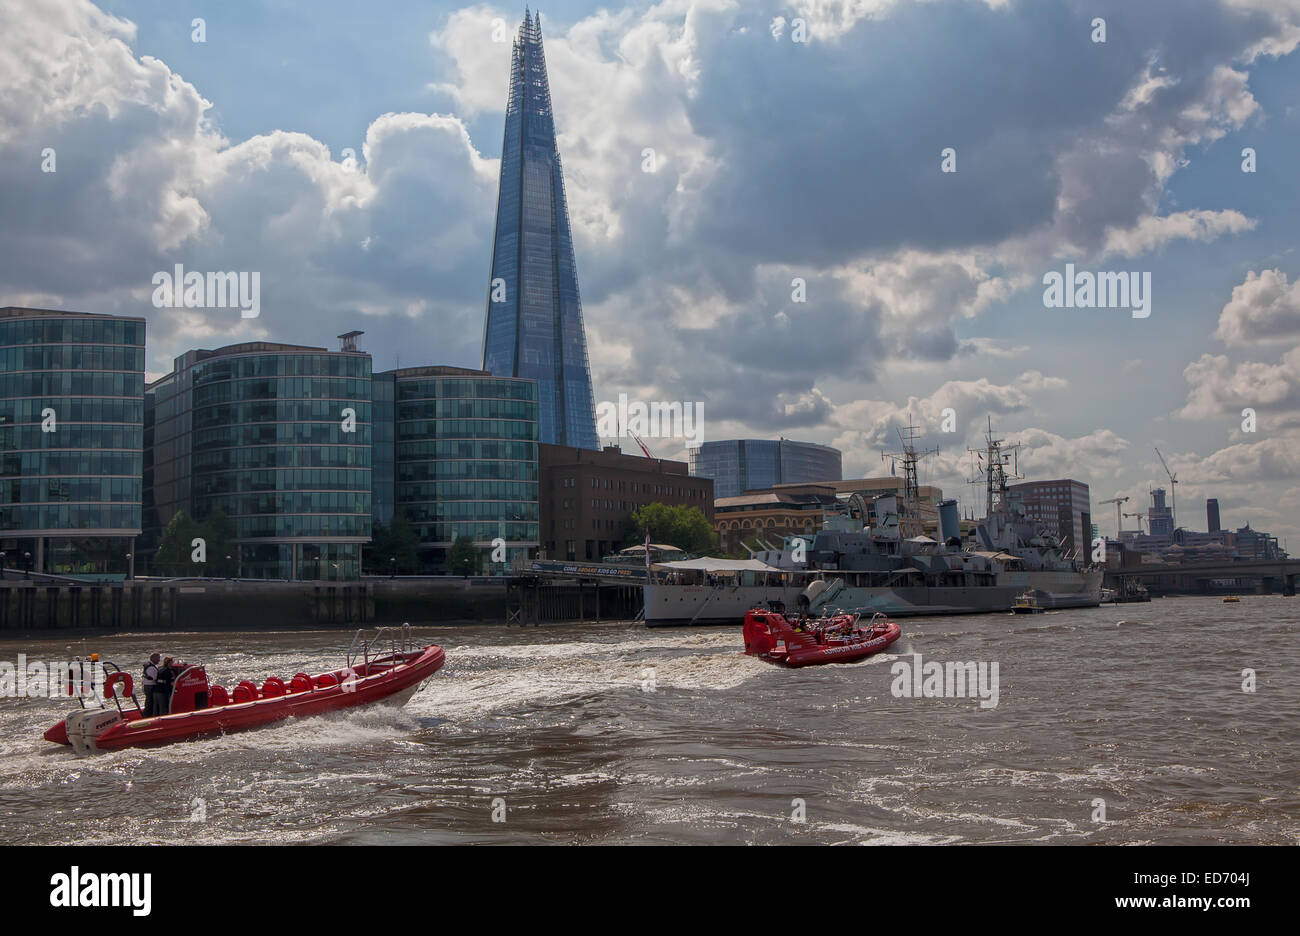 The London Shard seen from the River Thames Stock Photo